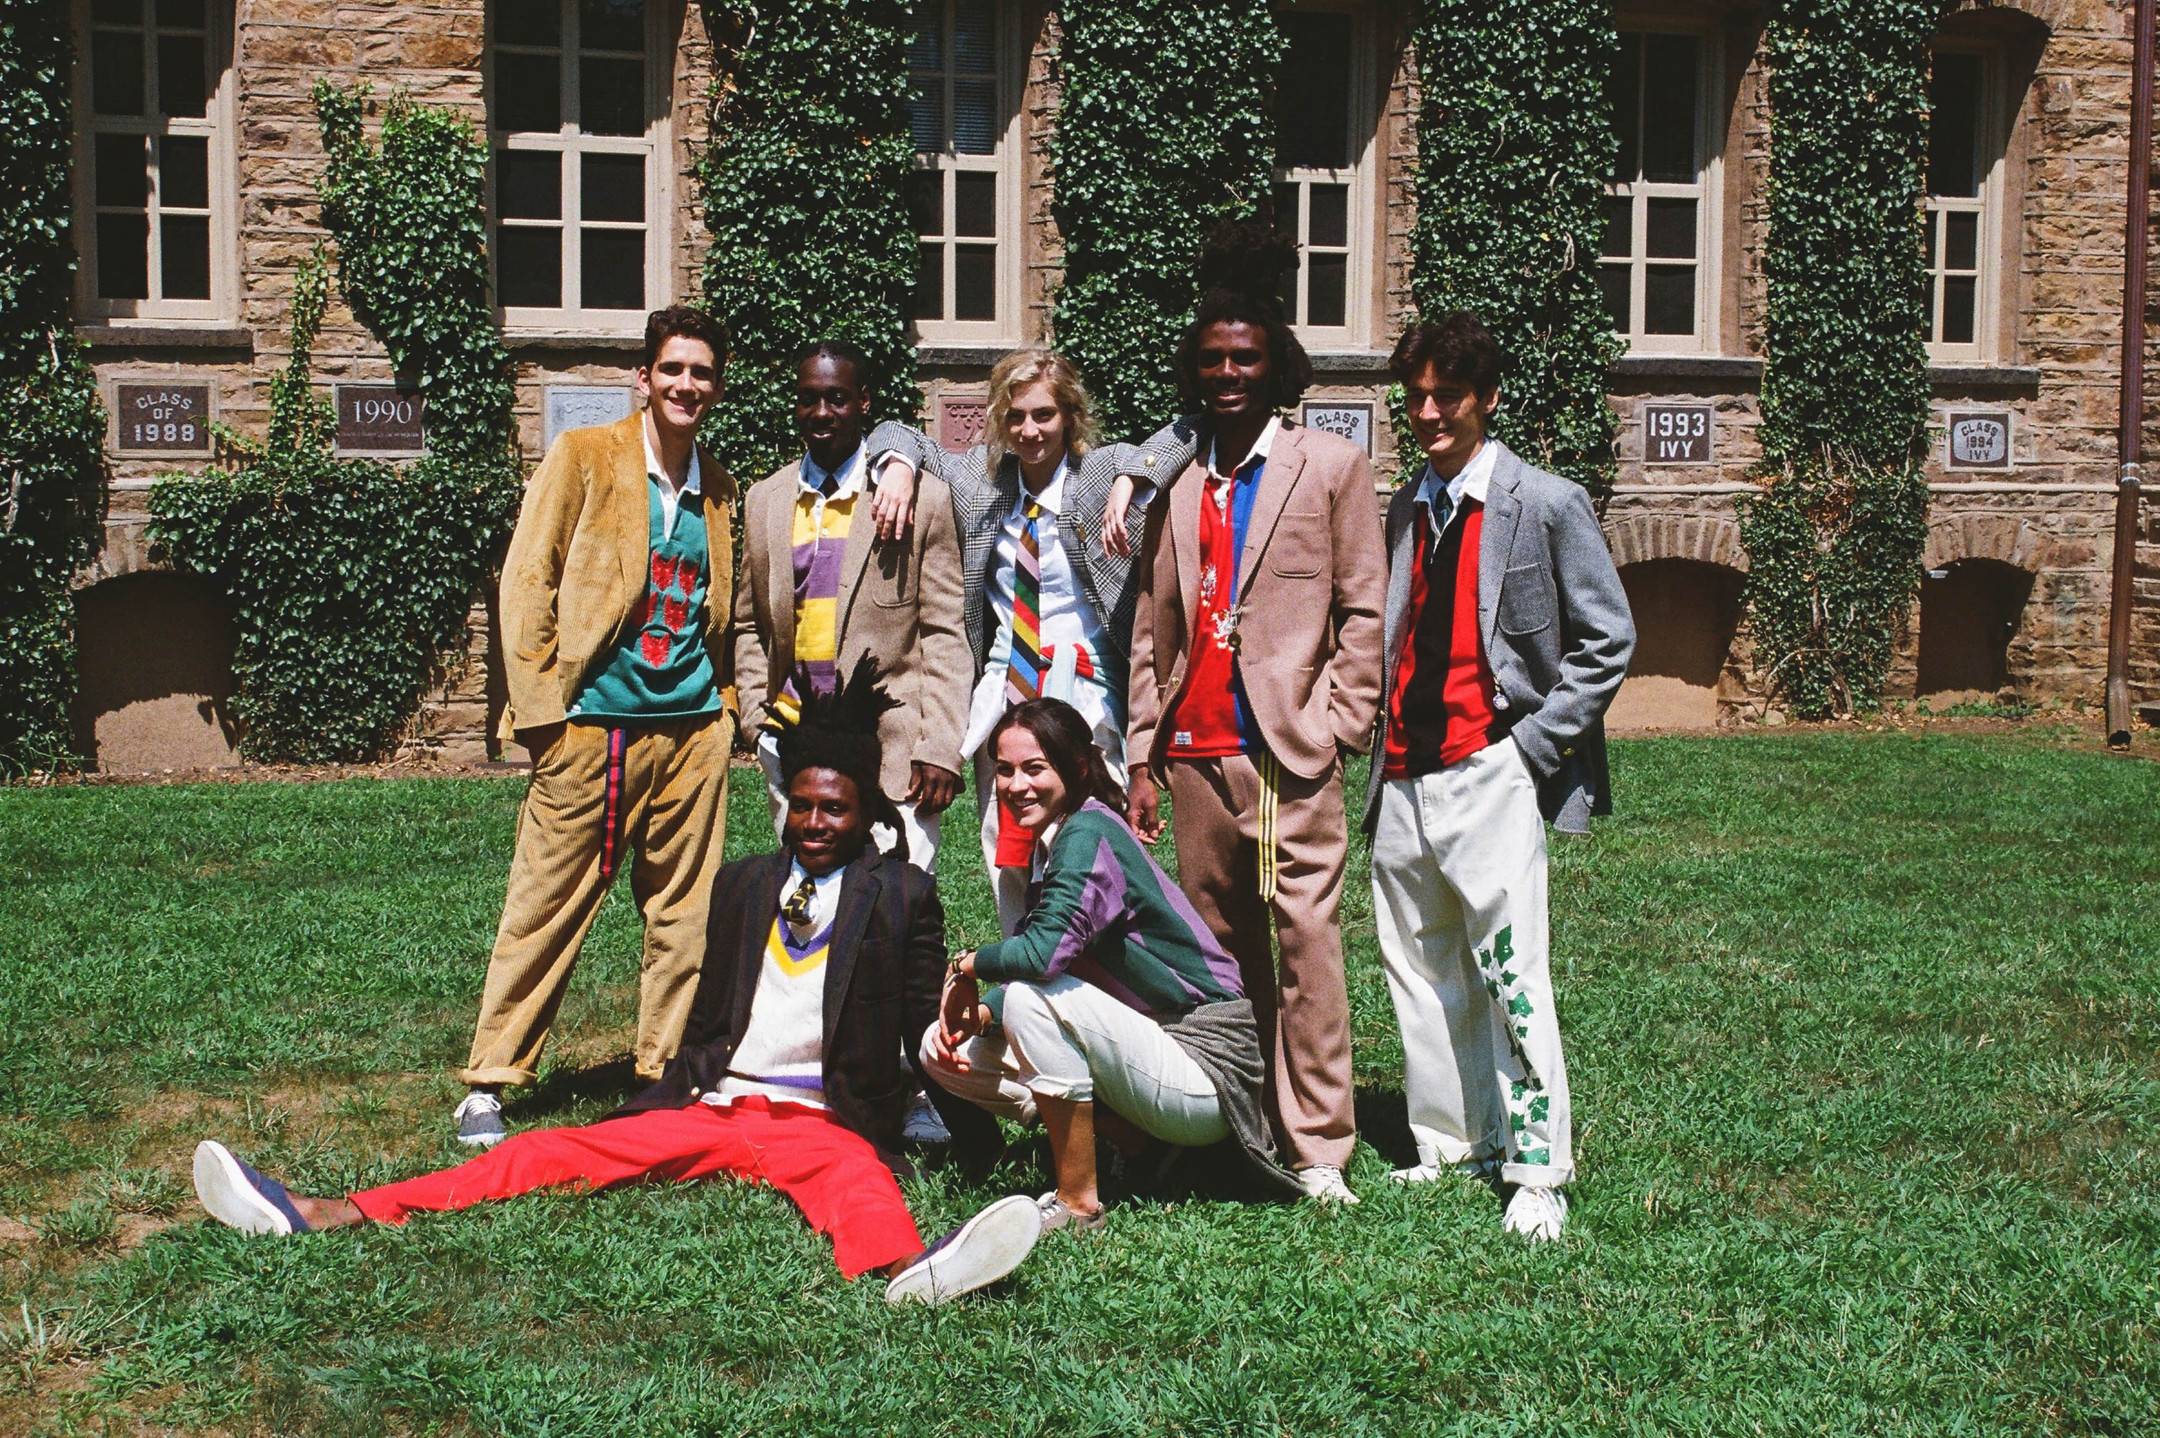 Models wearing various Rugbies, Trousers and Blazers